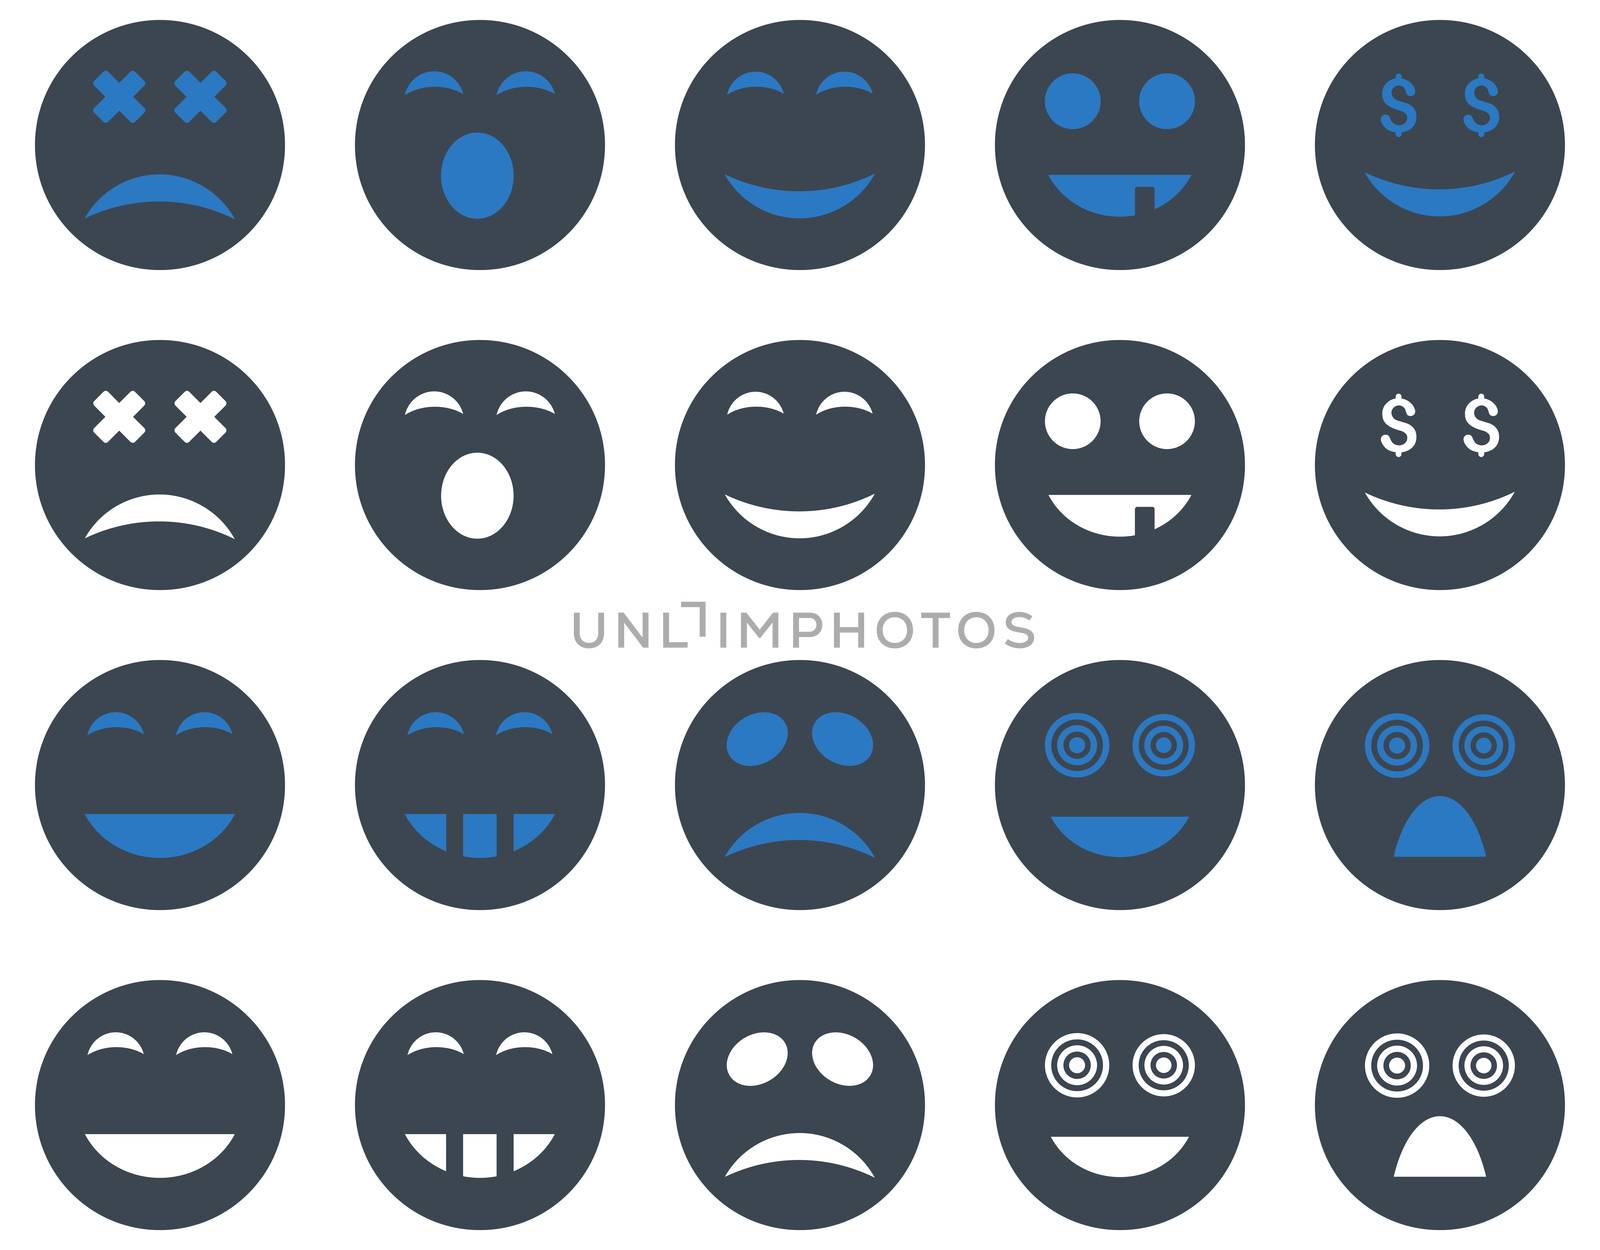 Smile and emotion icons by ahasoft